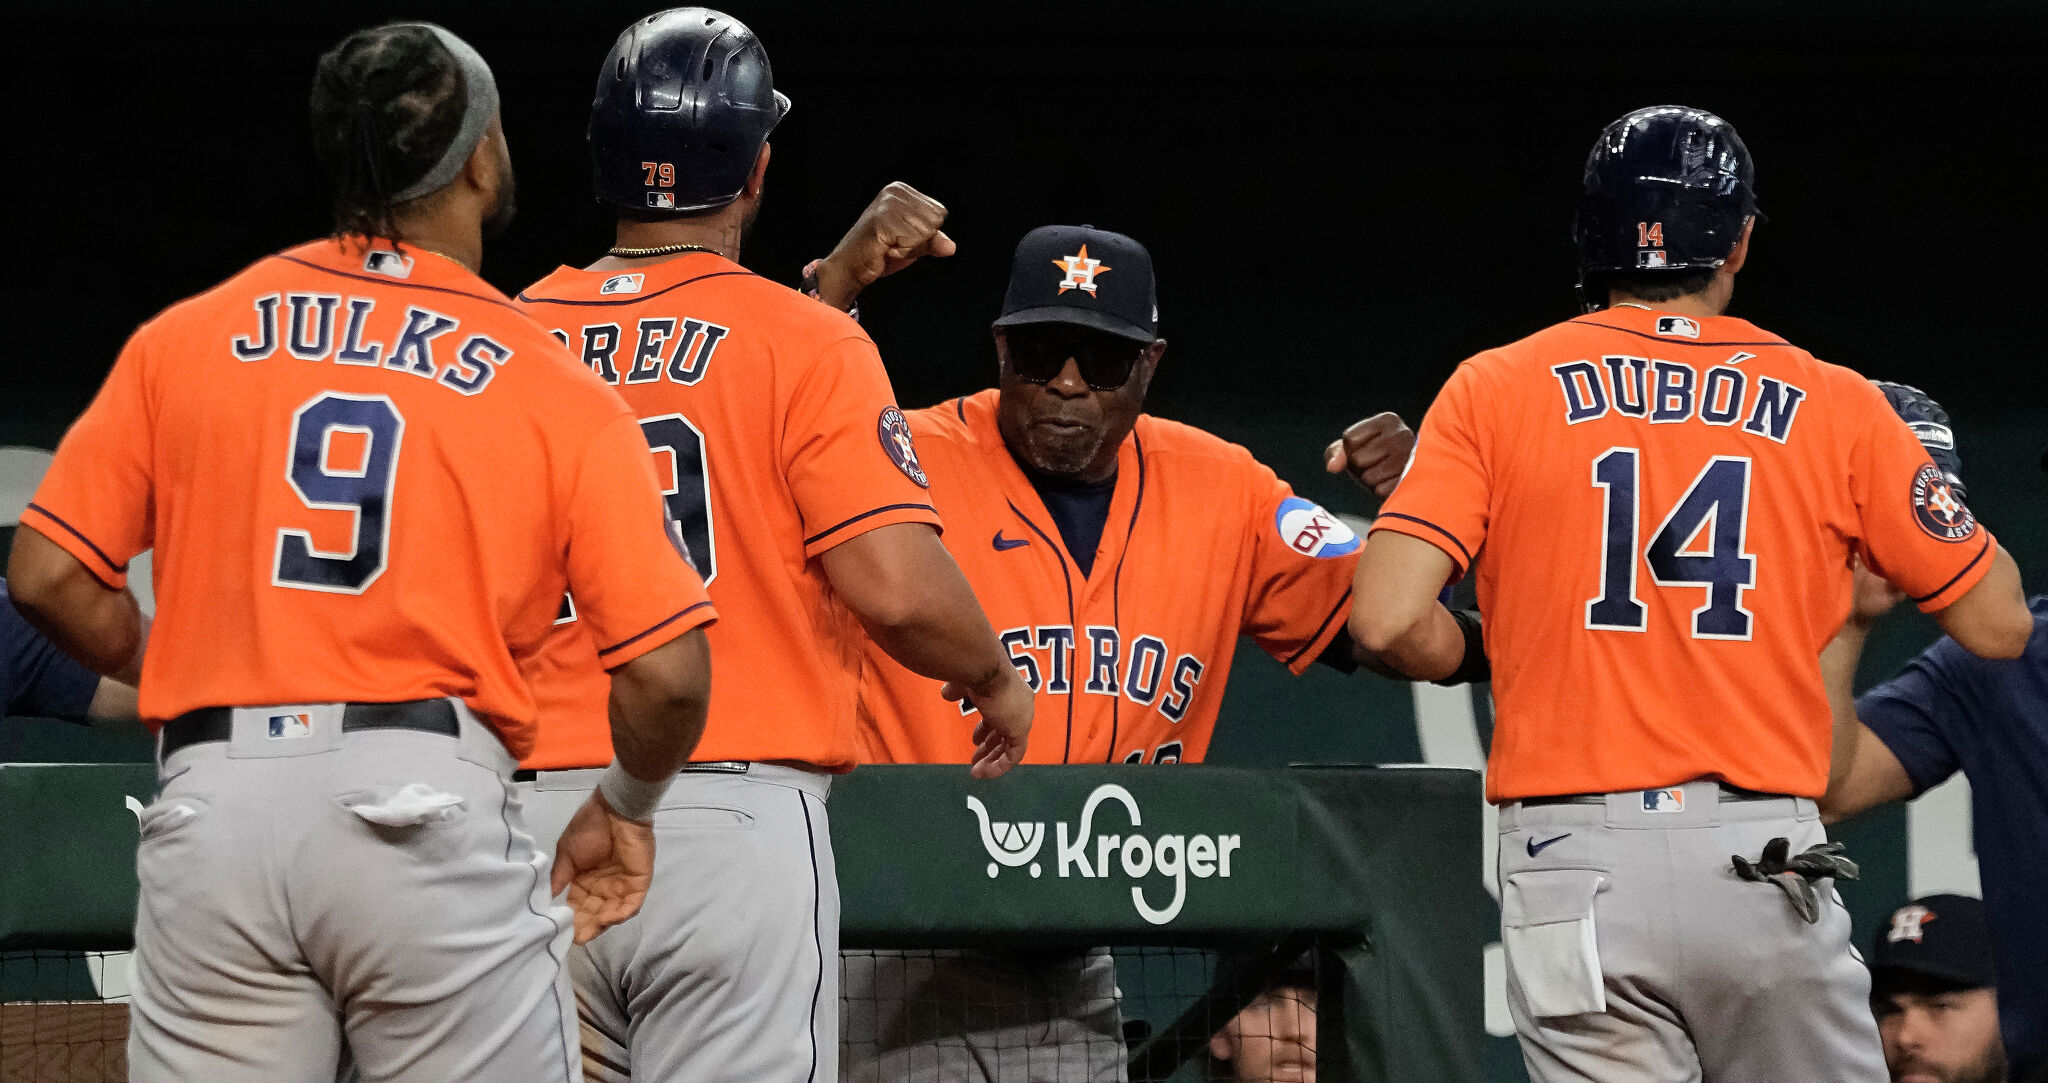 The Astros Deliver a Dramatic Reminder of Their Dominance - WSJ